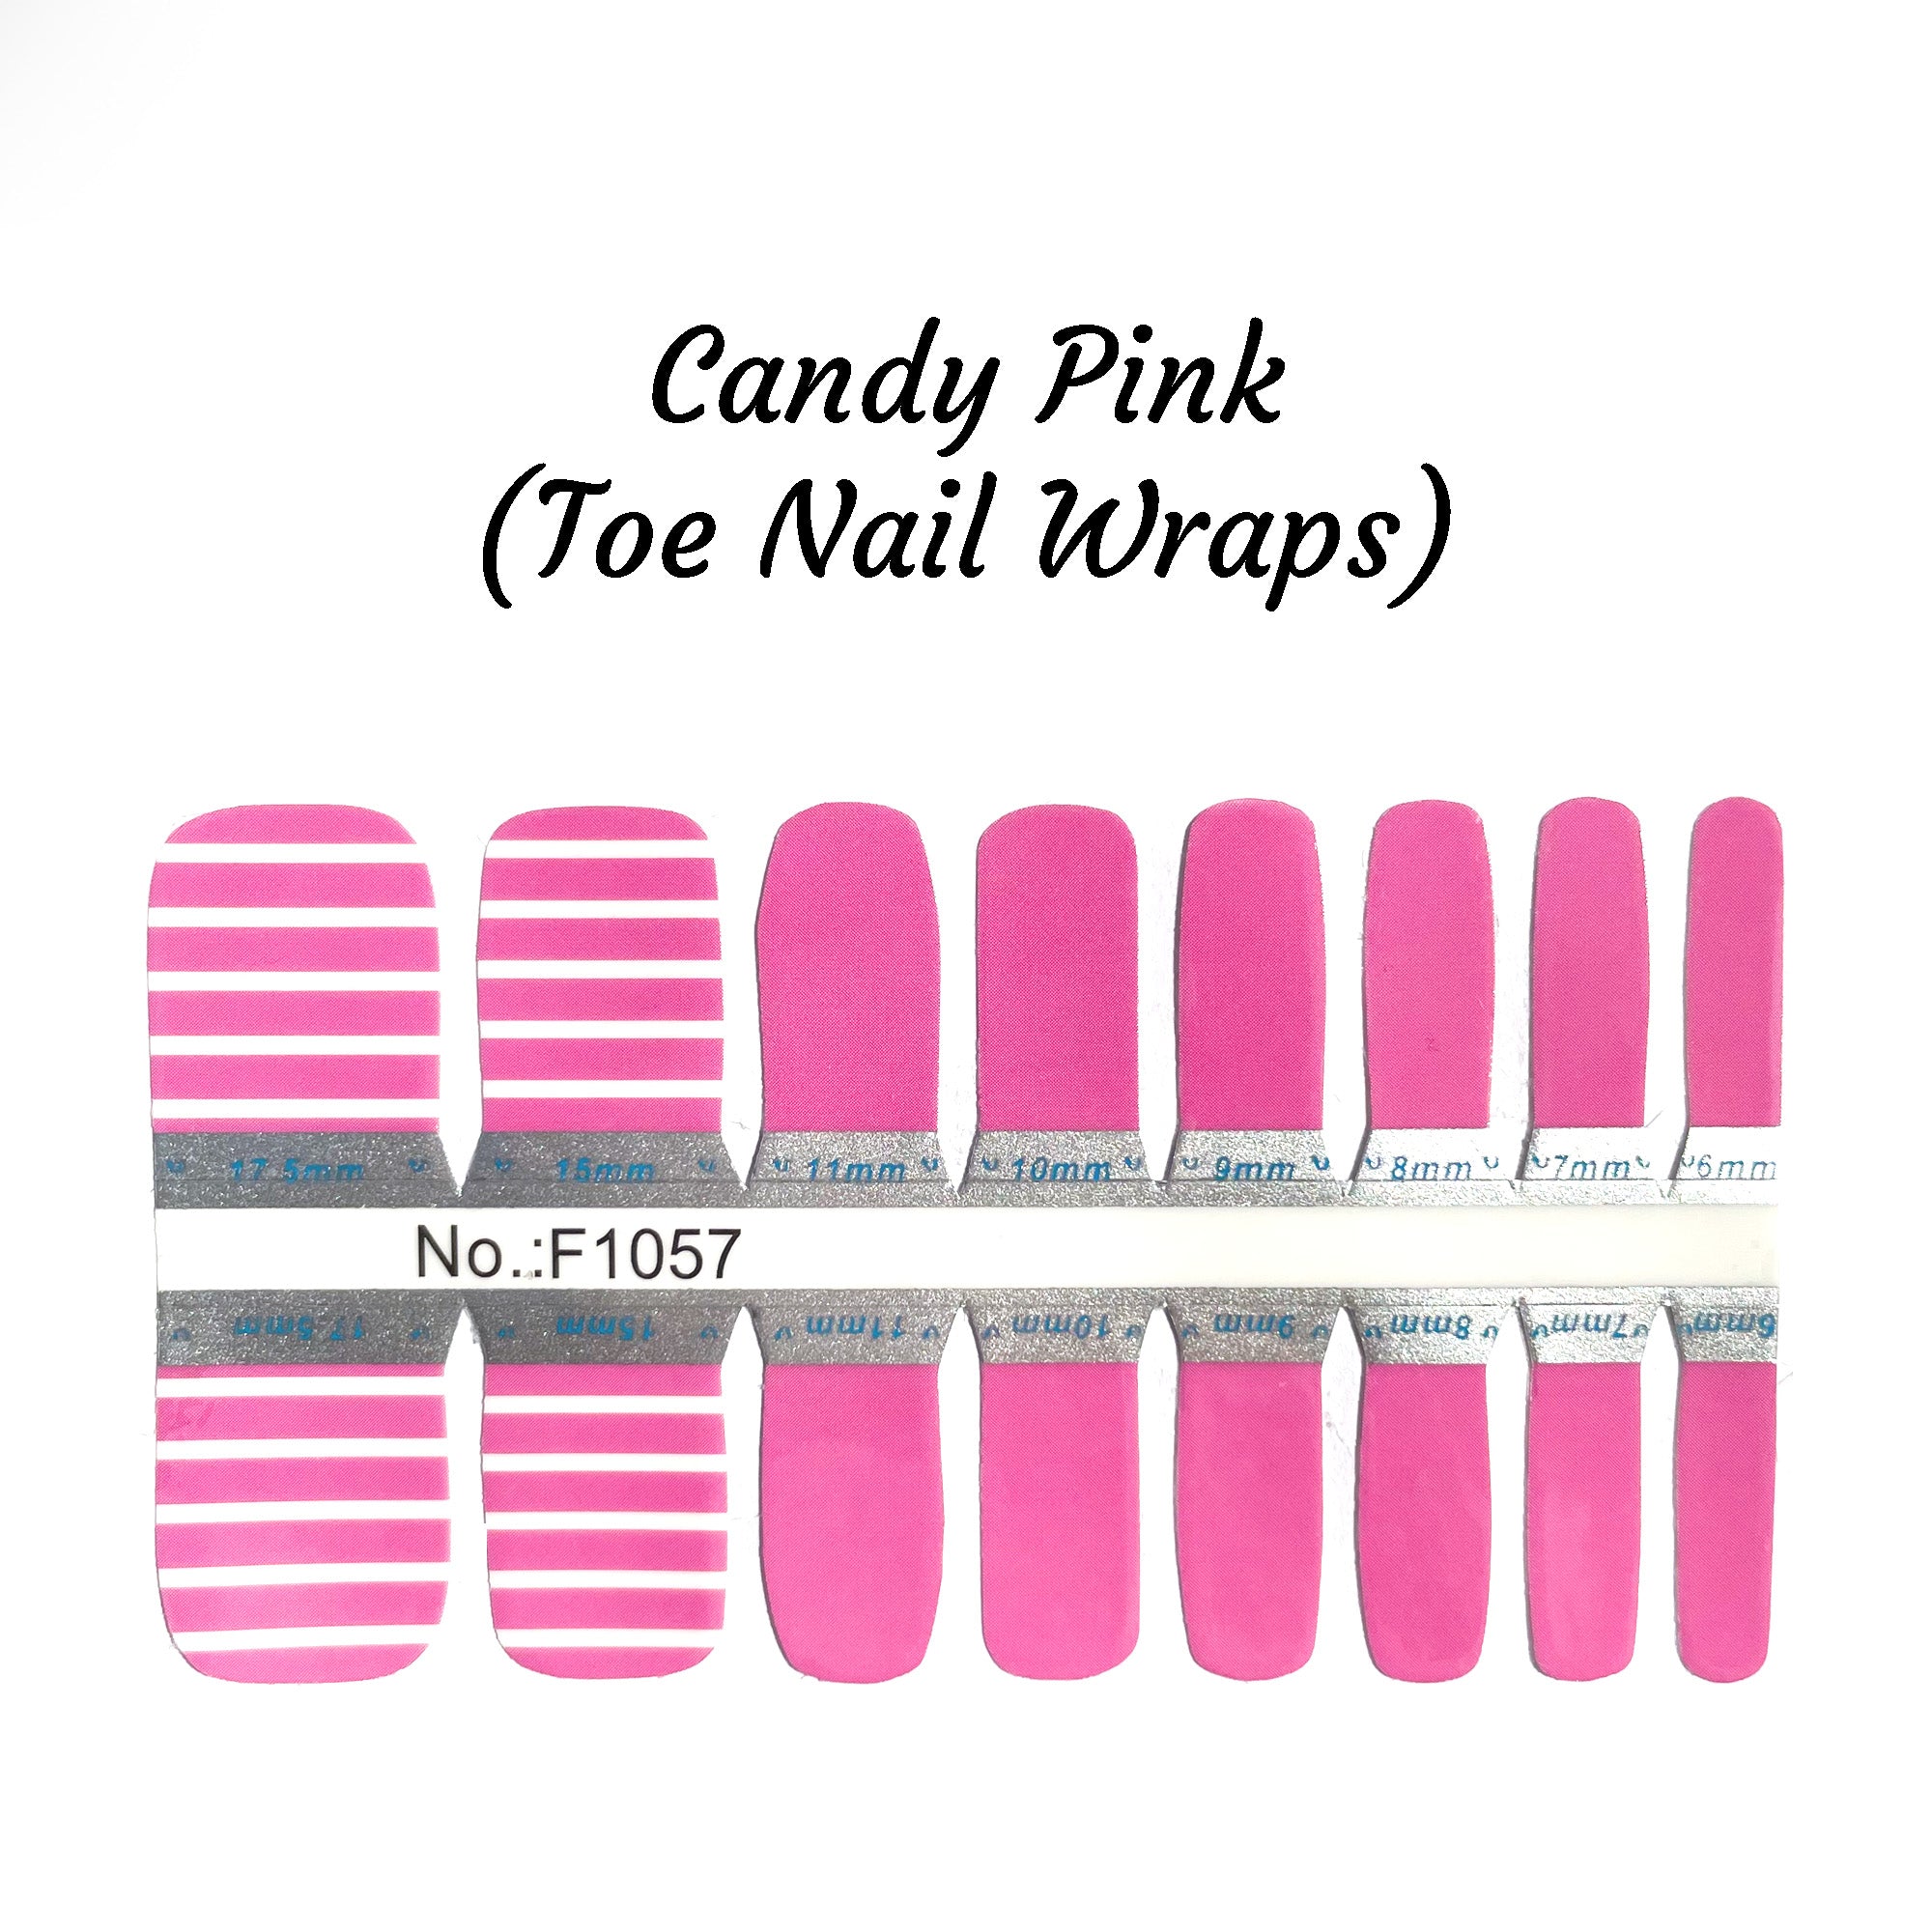 Candy Pink Toe